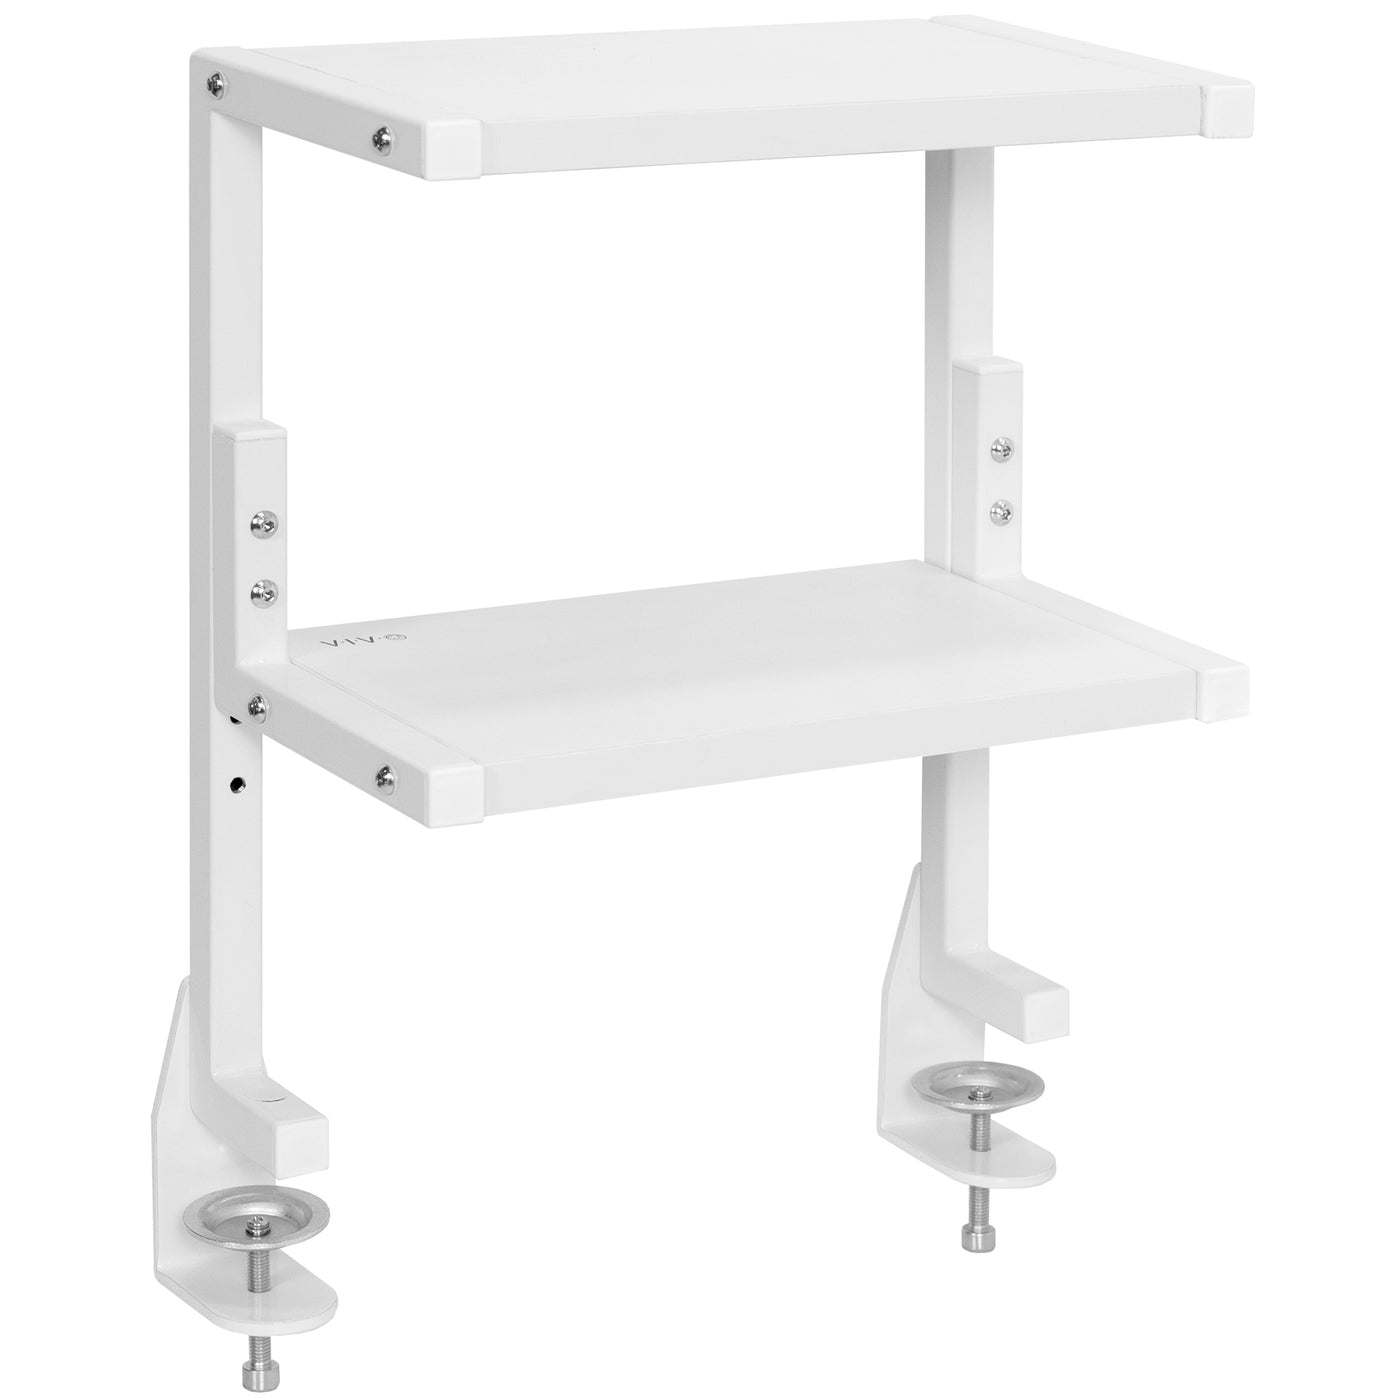 Sleek above desk or below desk clamp-on shelf with two shelves for convenient storage and organization. Lower shelf height adjusts and is removable.